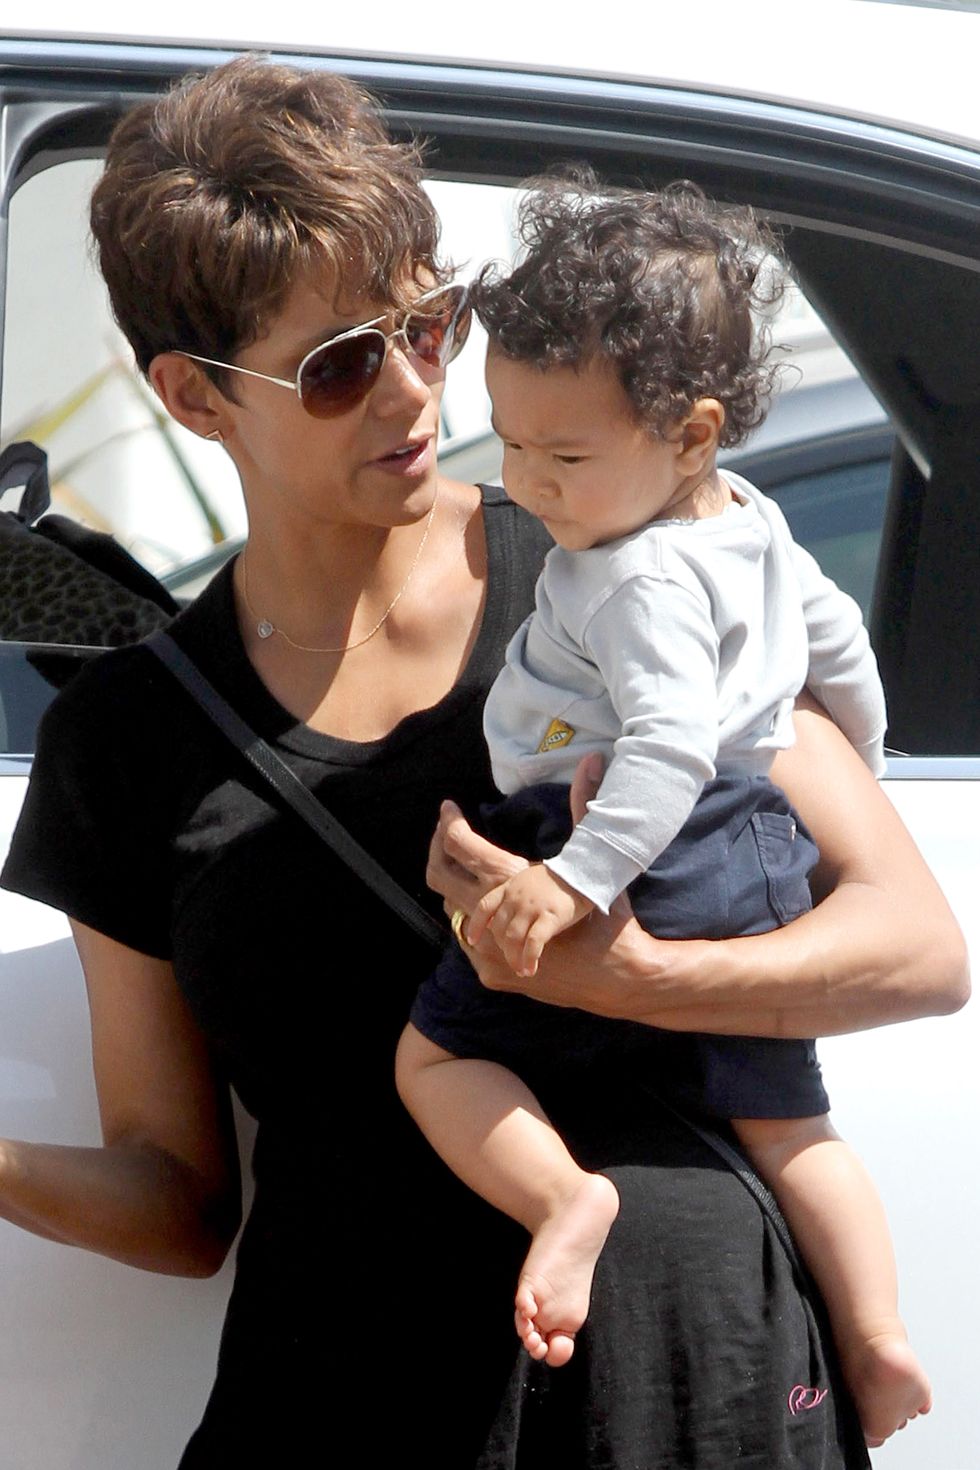 exclusive shot on 7514 los angeles, ca   halle berry steps out with her 9 month old son, maceo this afternoon for some mother son time  the actress carried her little boy in one arm while holding a giraffe toy in hand  it looks like maceo wanted his favorite toy had his eyes on it the whole time  halle was dressed for the warm weather wearing a black high low dress, which revealed what may possibly a baby bump  could halle be pregnant with her third child akm gsi          july 5, 2014to license these photos, please contact steve ginsburg310 505 8447323 423 9397steveakmgsicomsalesakmgsicomormaria buda917 242 1505mbudaakmgsicomginsburgspalyincgmailcom